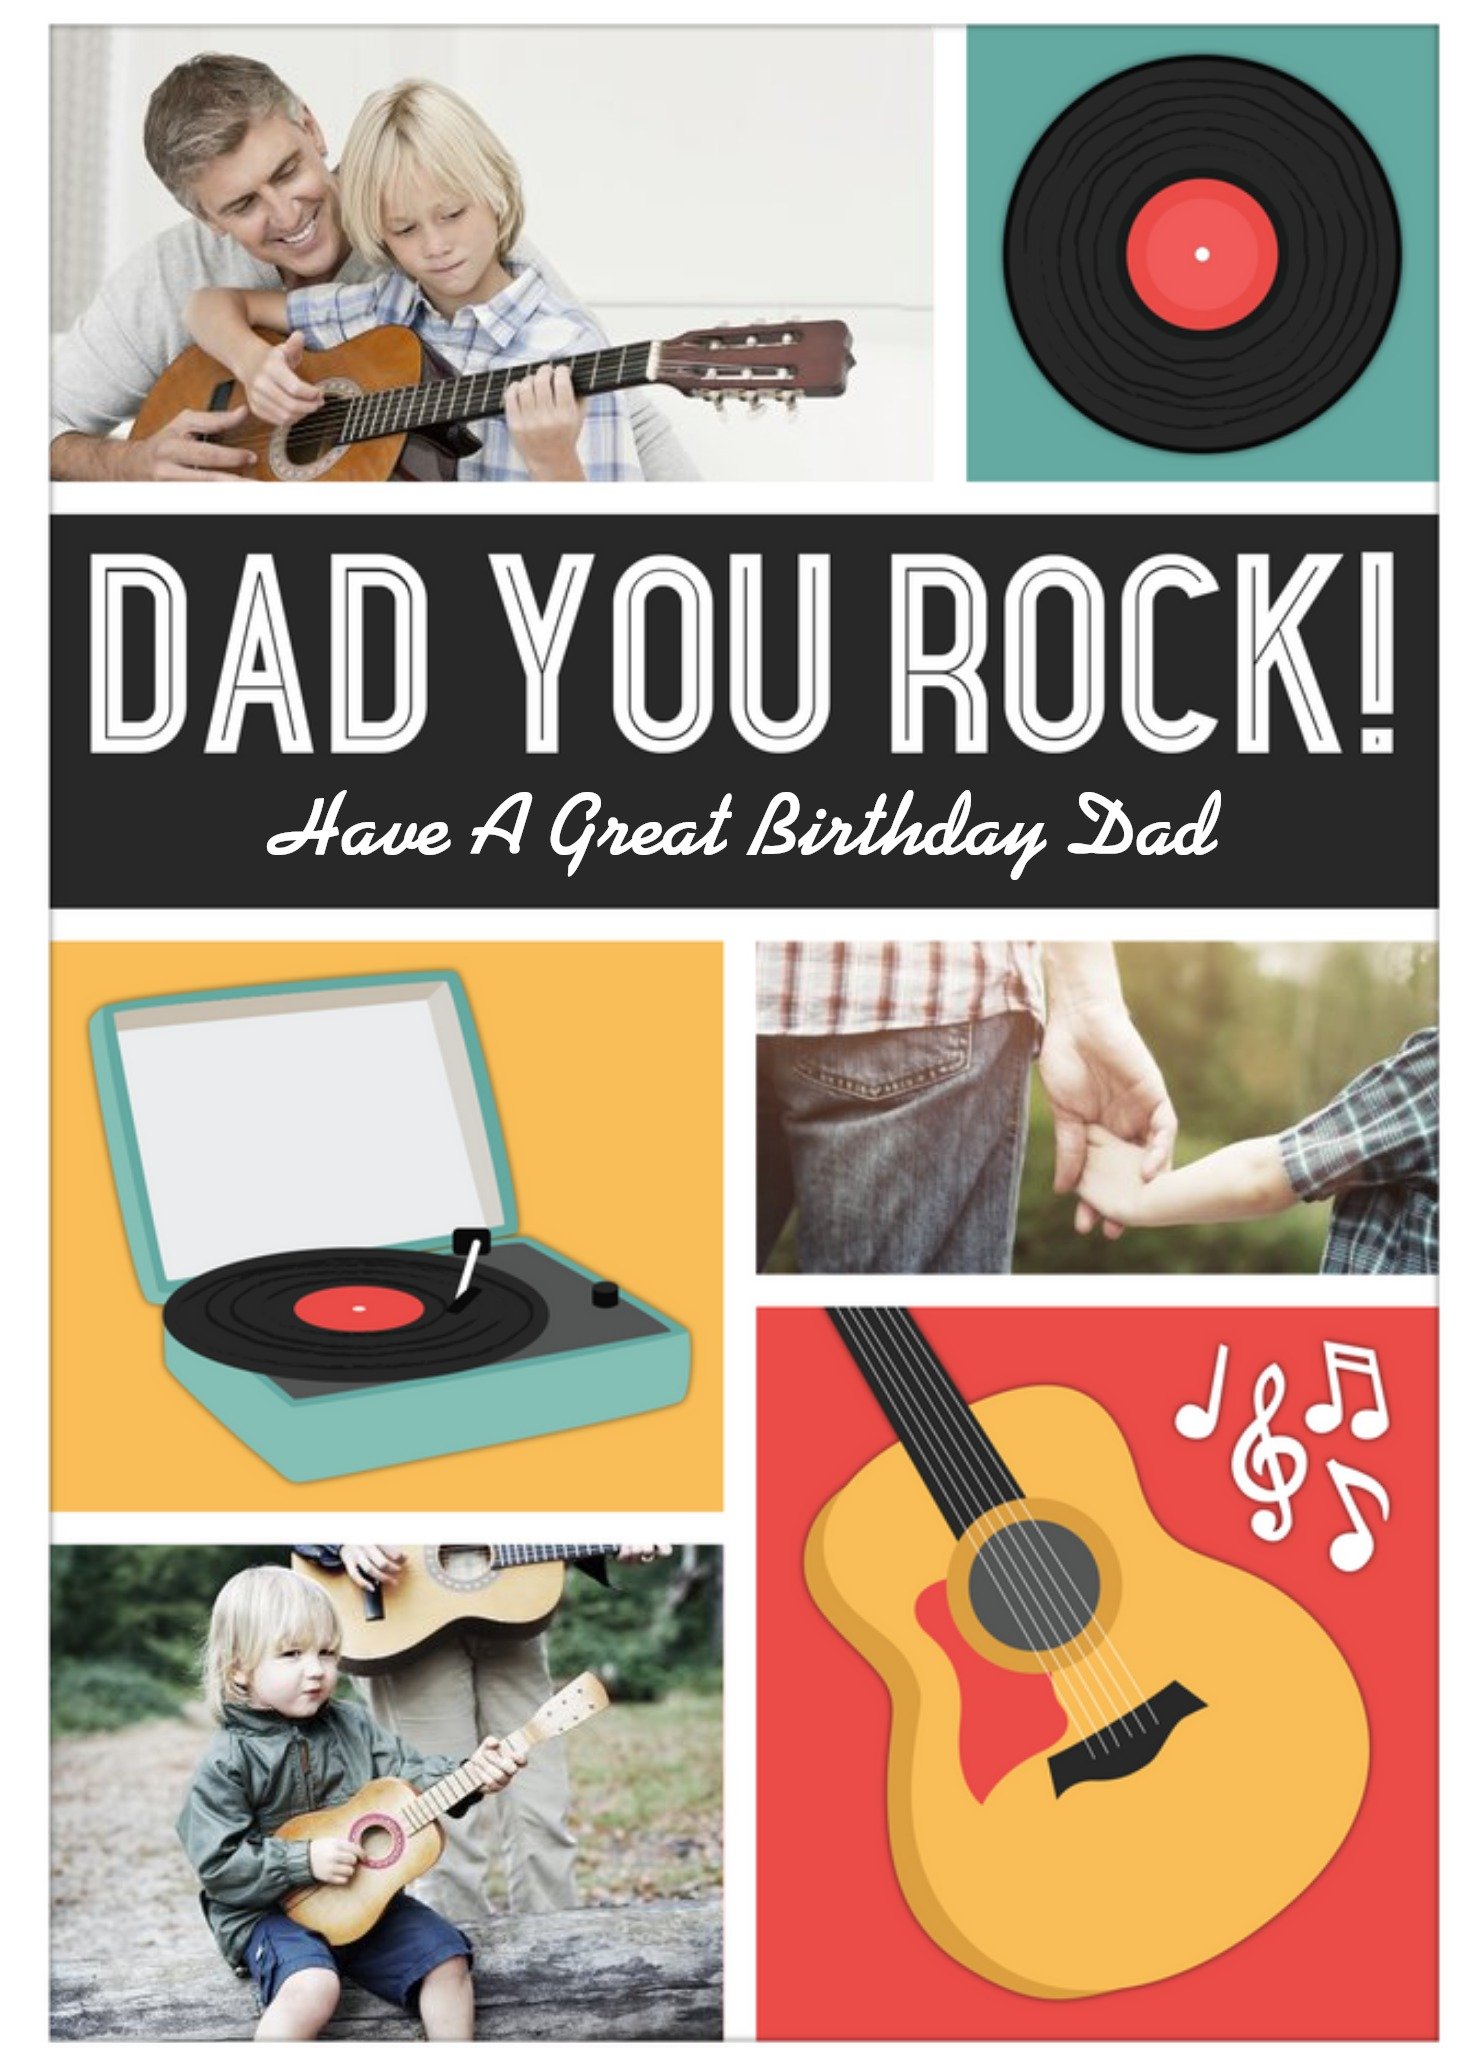 Moonpig Record Players And Guitar Personalised Photo Upload Birthday Card For Dad, Large